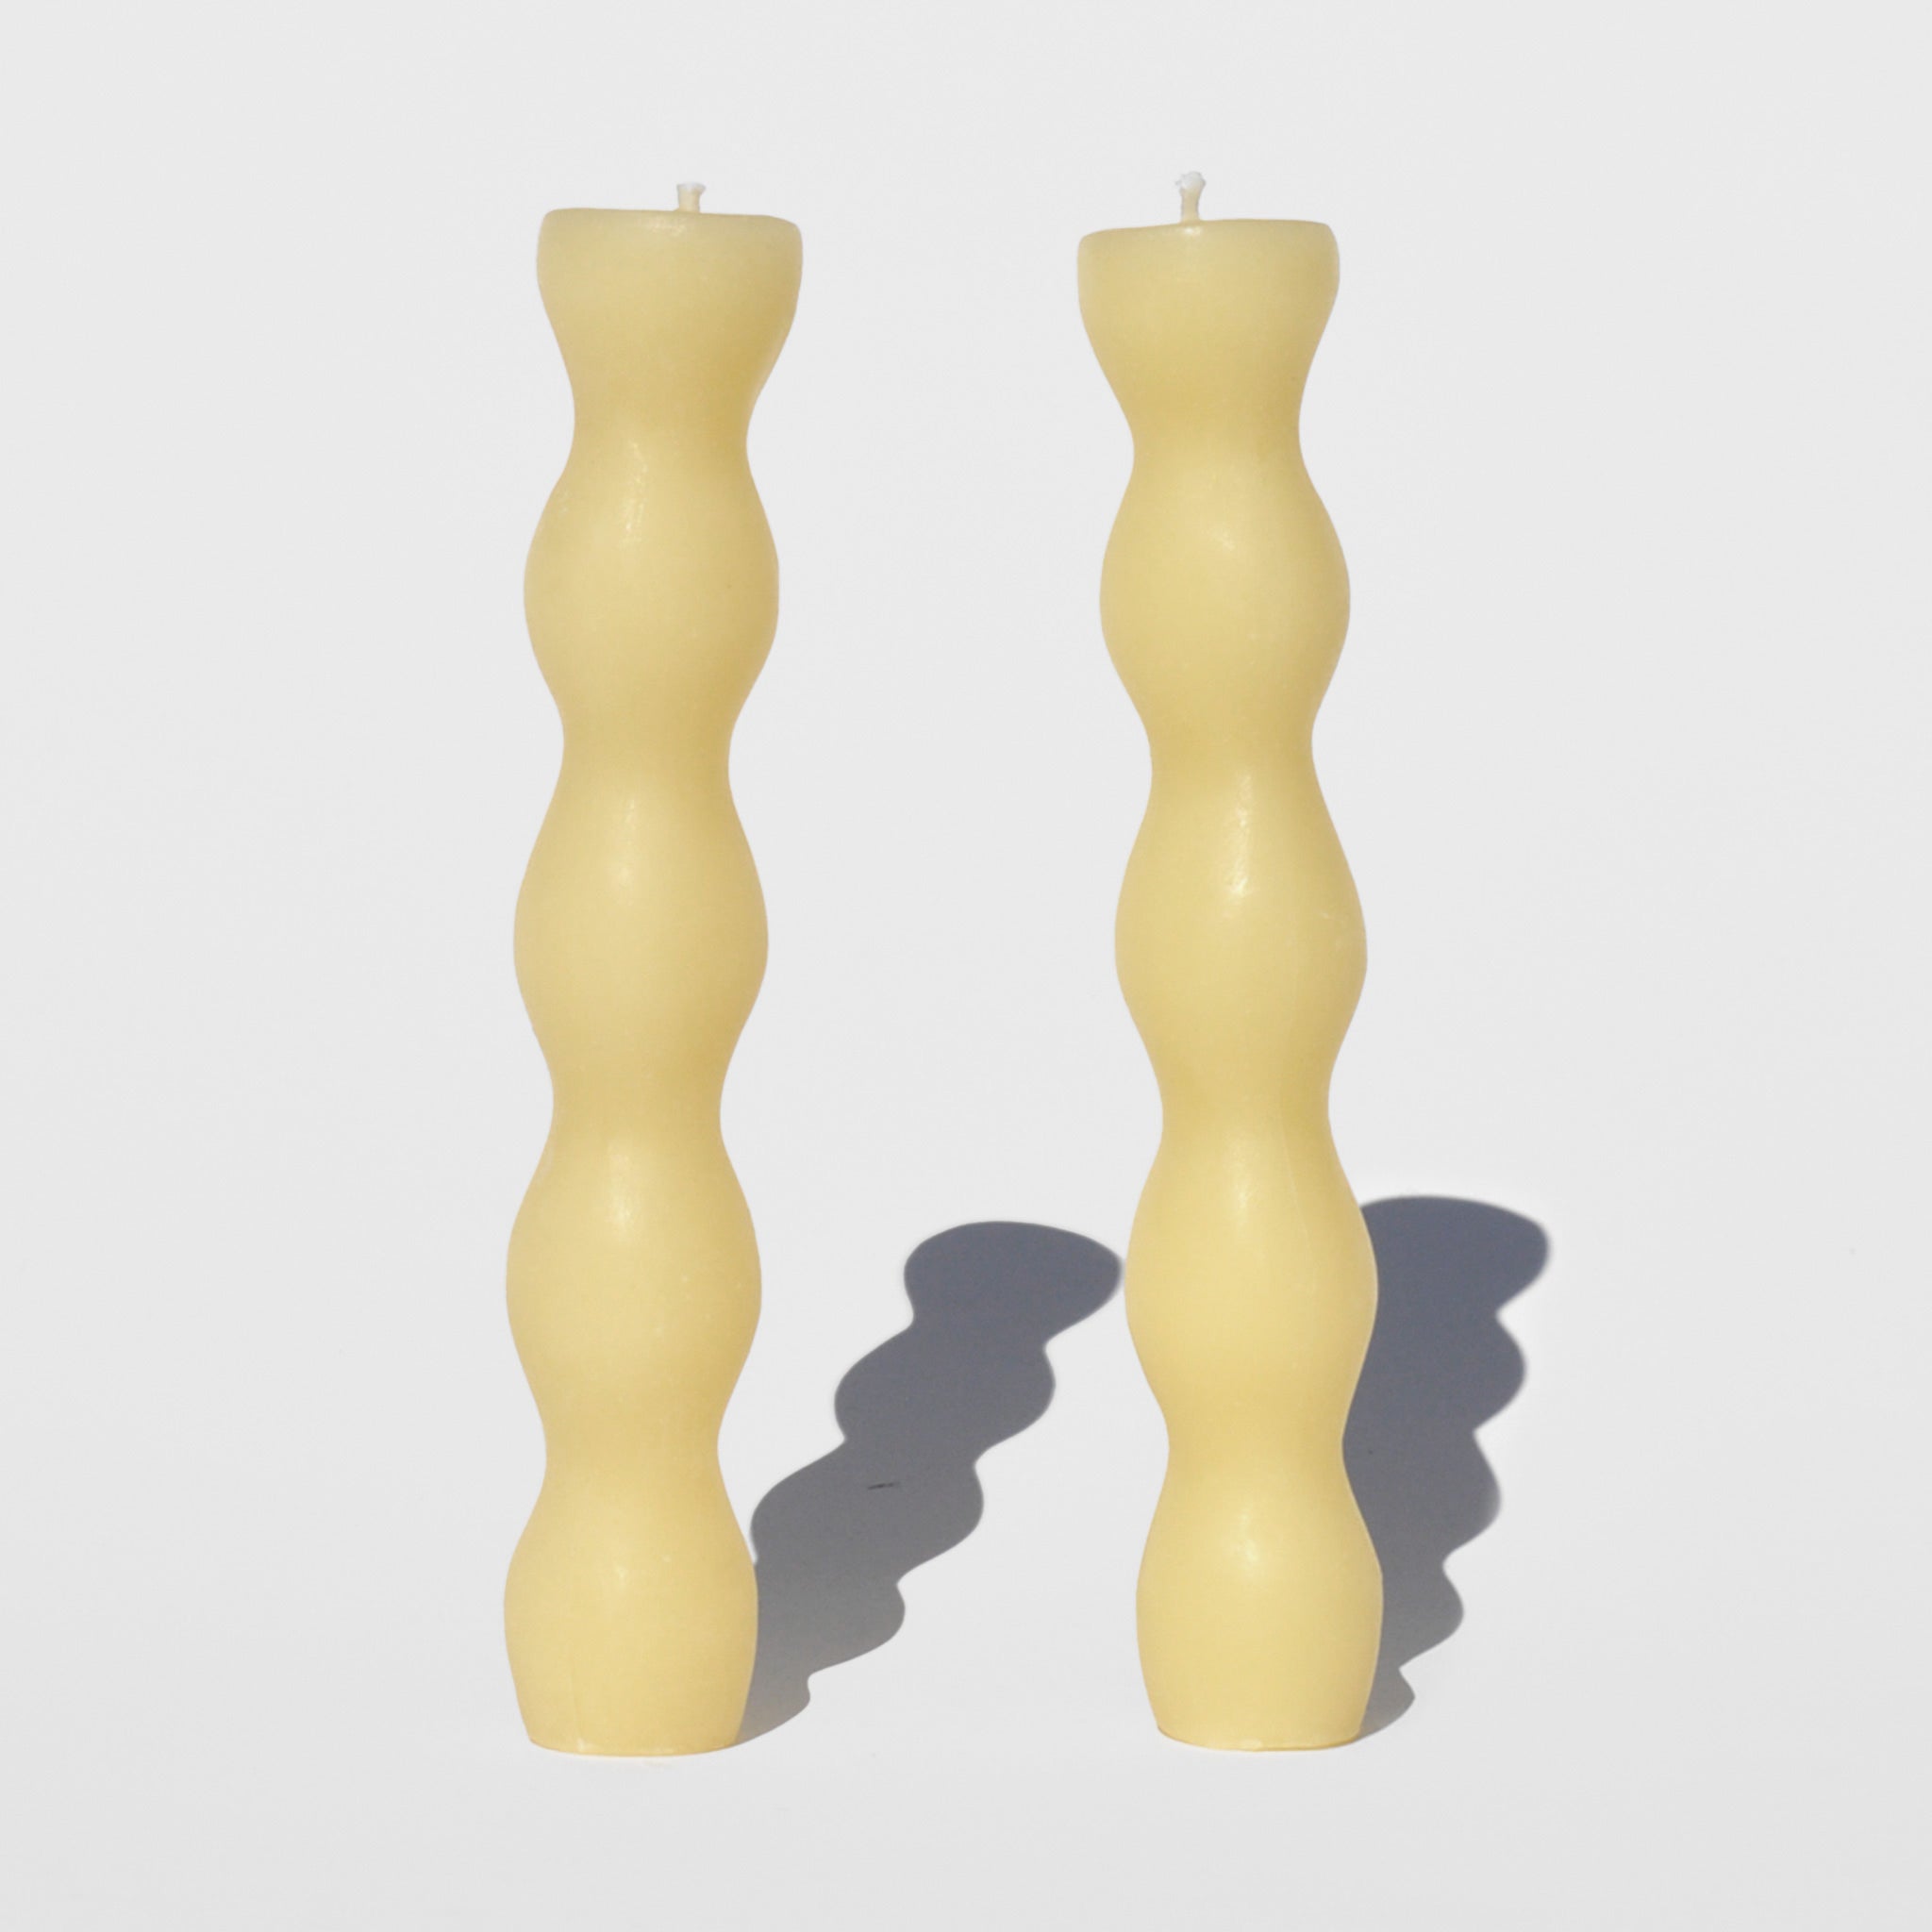 Photo of a pair of natural beeswax candles with a wavy columned shape.